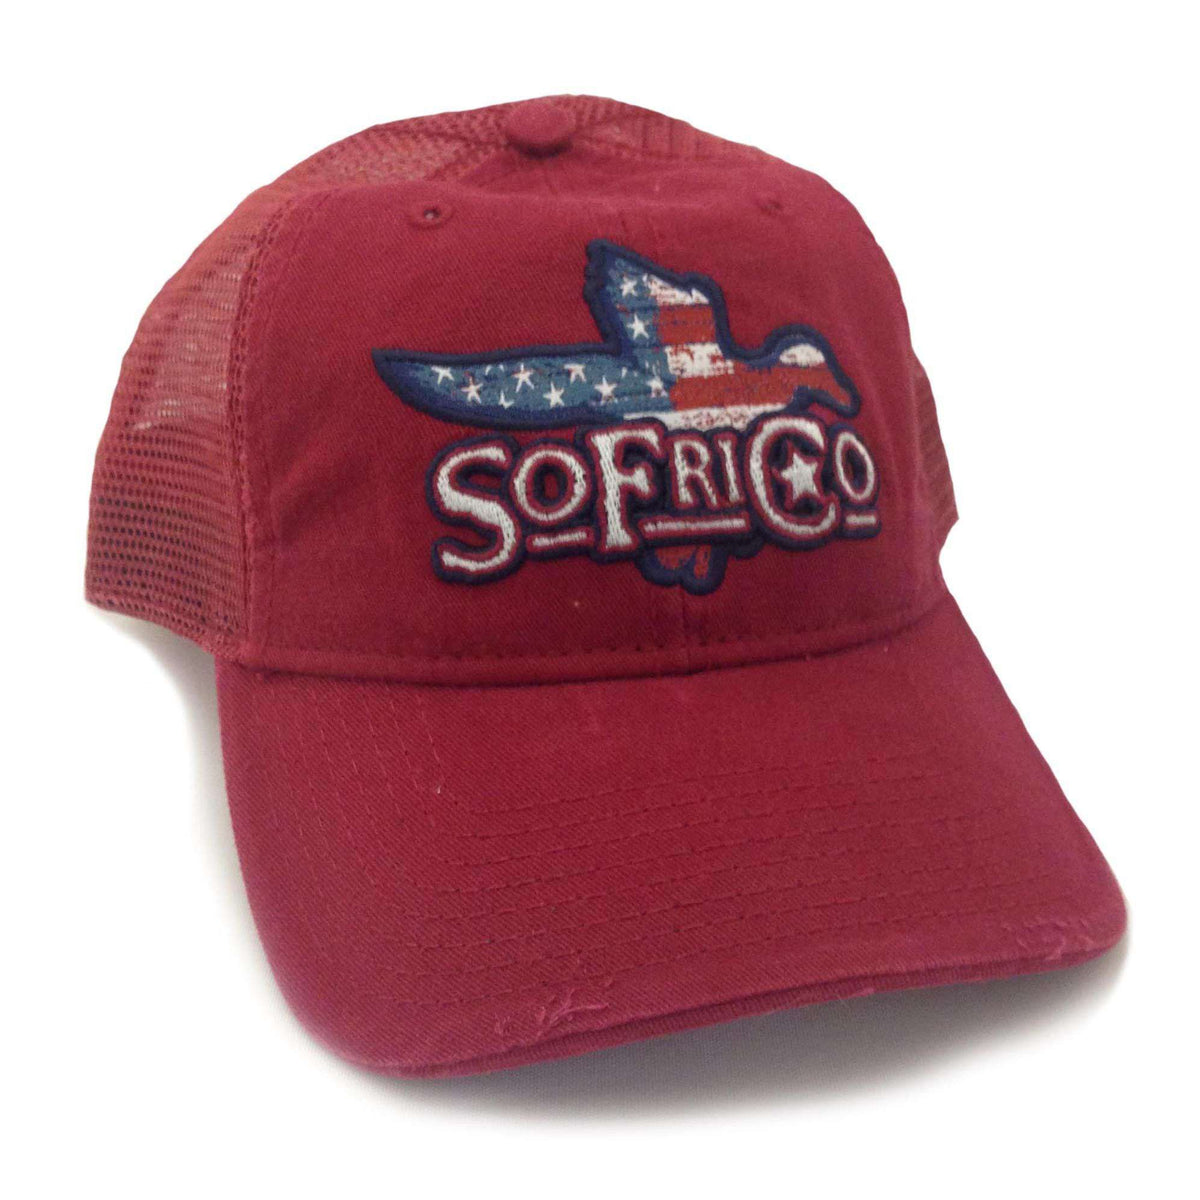 Southern Fried Cotton No Worries Performance Hat